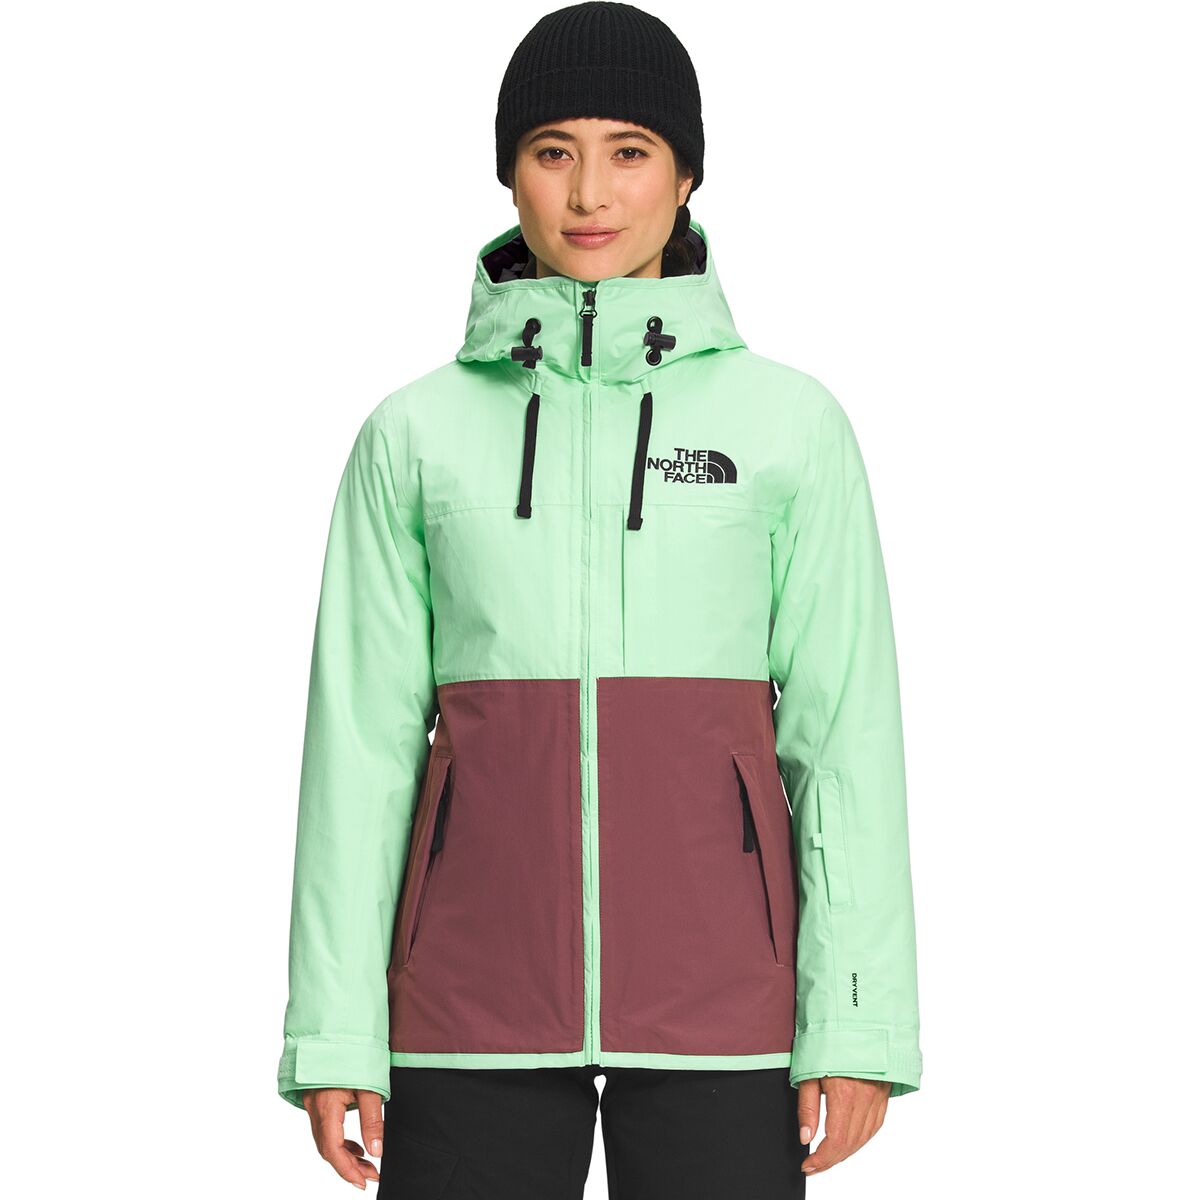 The North Face Superlu Insulated Jacket - Women's